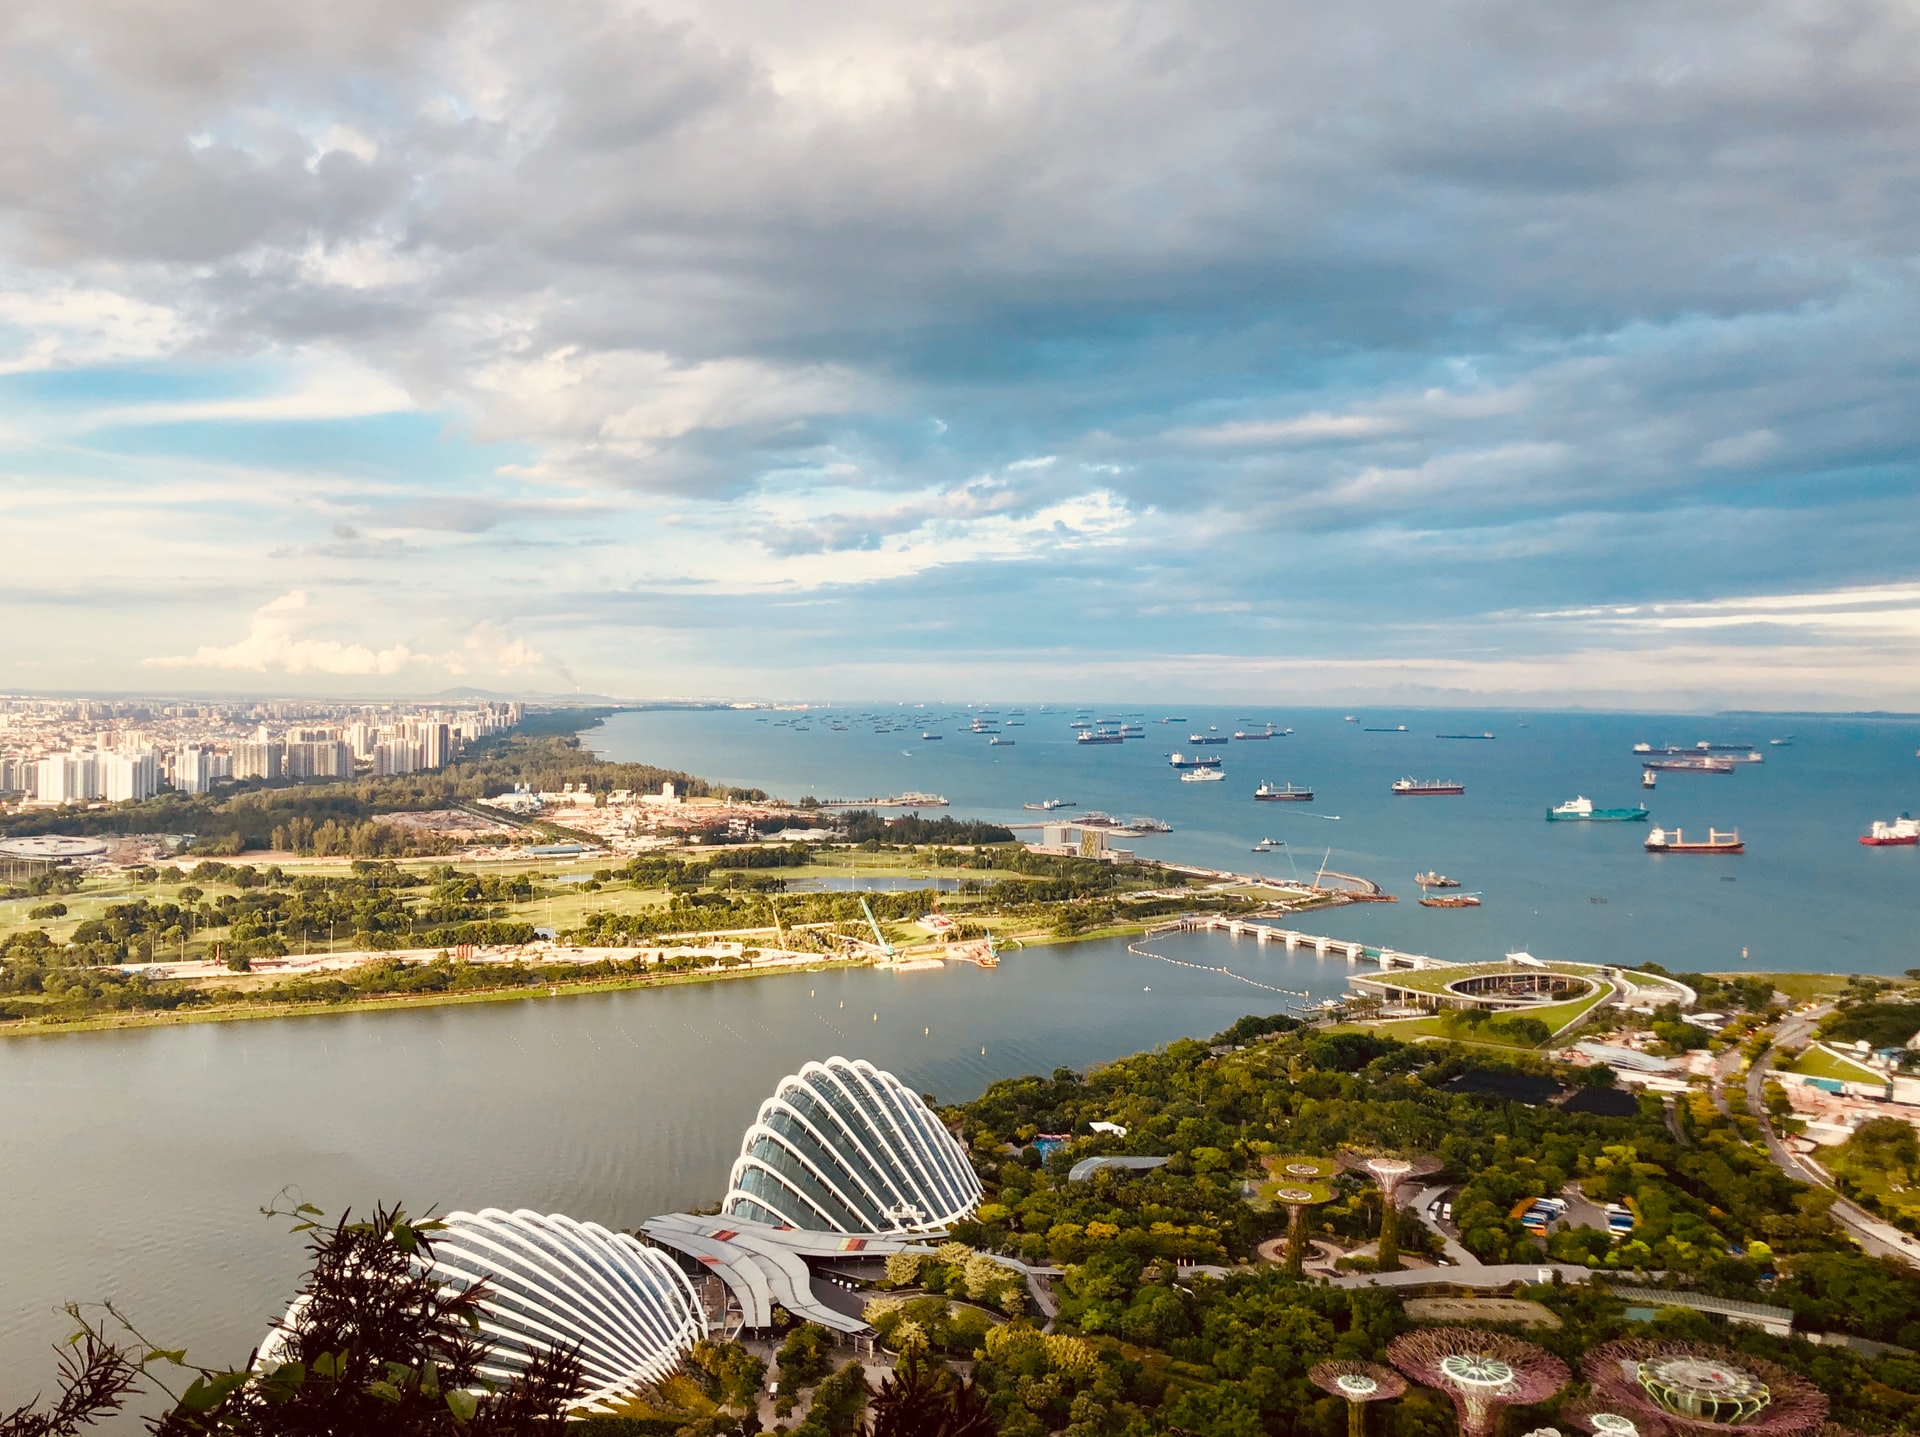 Aerial view of Singapore's bay